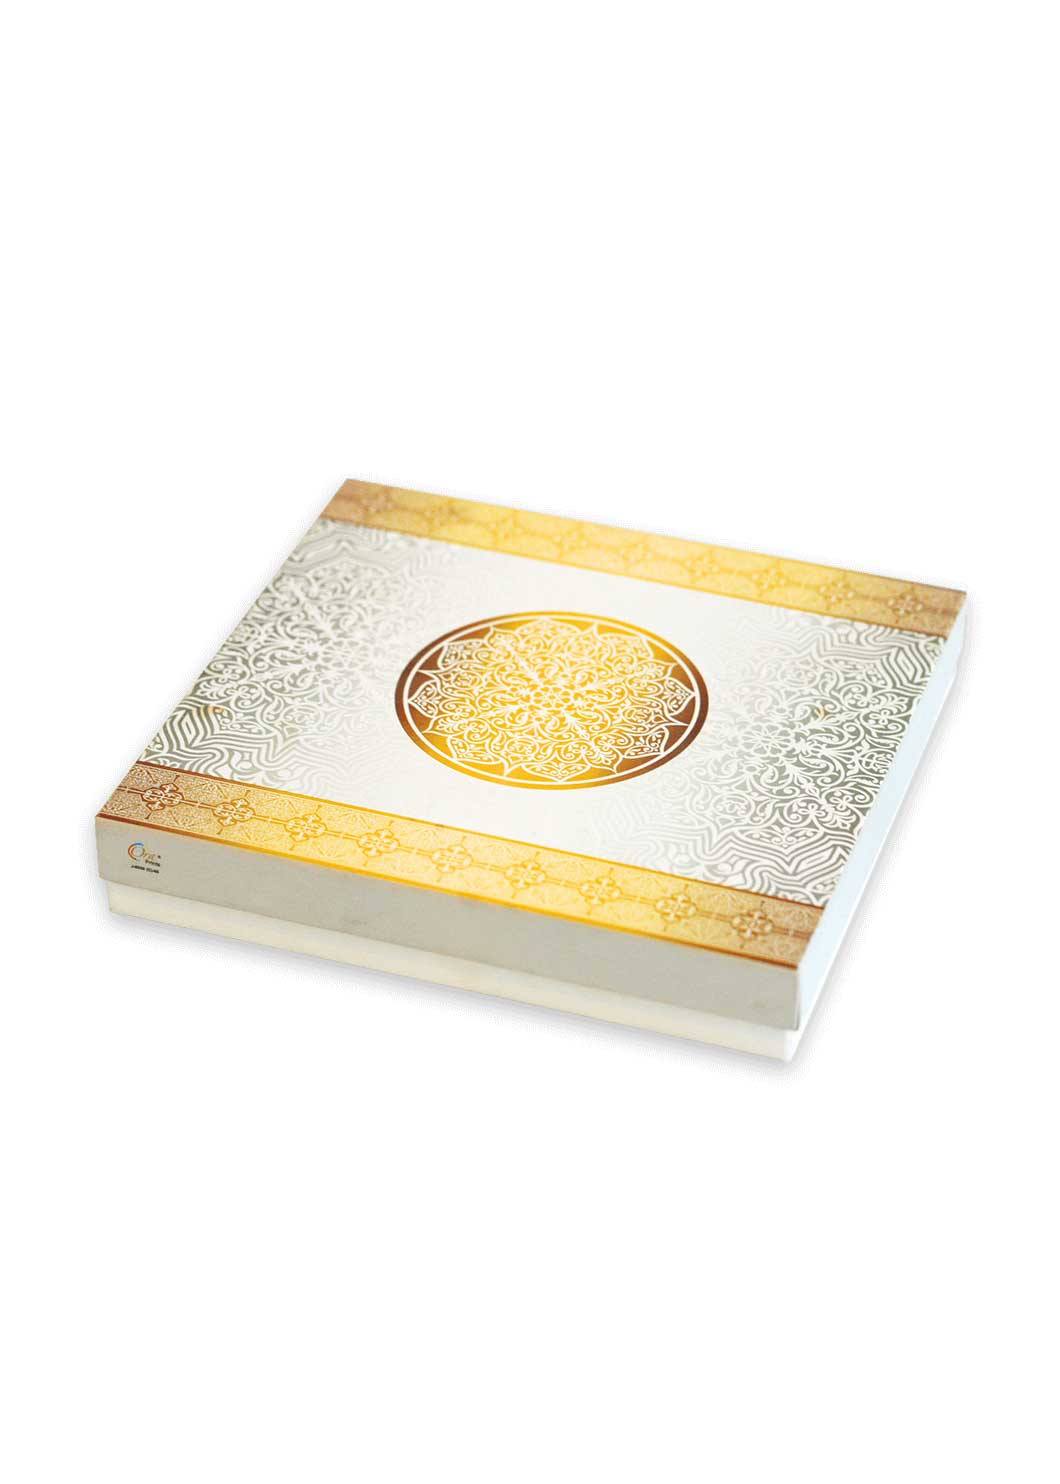 Stay Golden Design Box for Packing